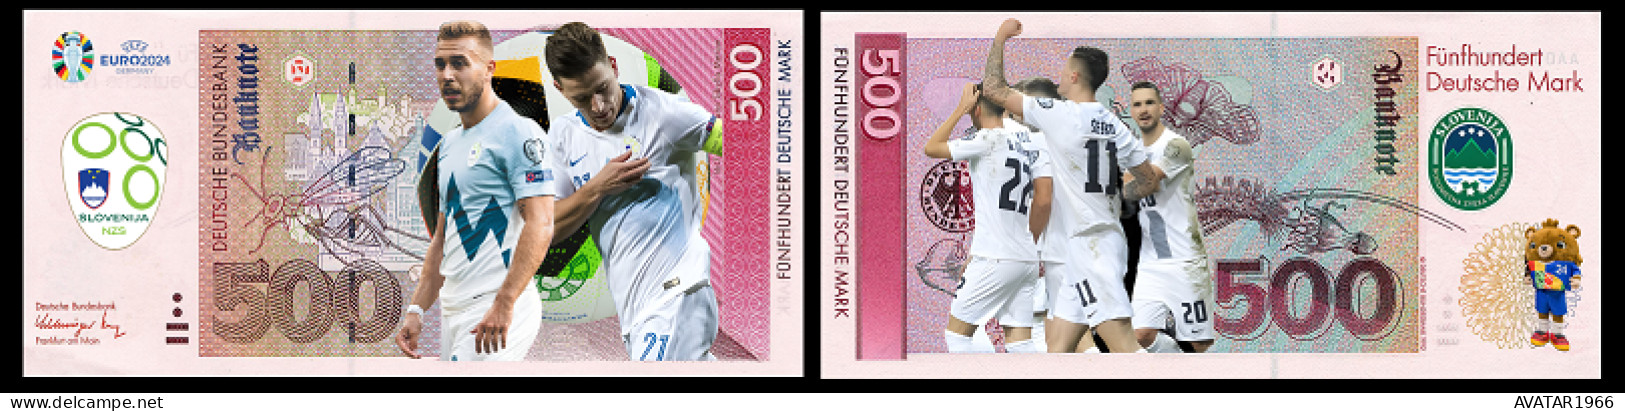 UEFA European Football Championship 2024 qualified country Slovenia  8 pieces Germany fantasy paper money